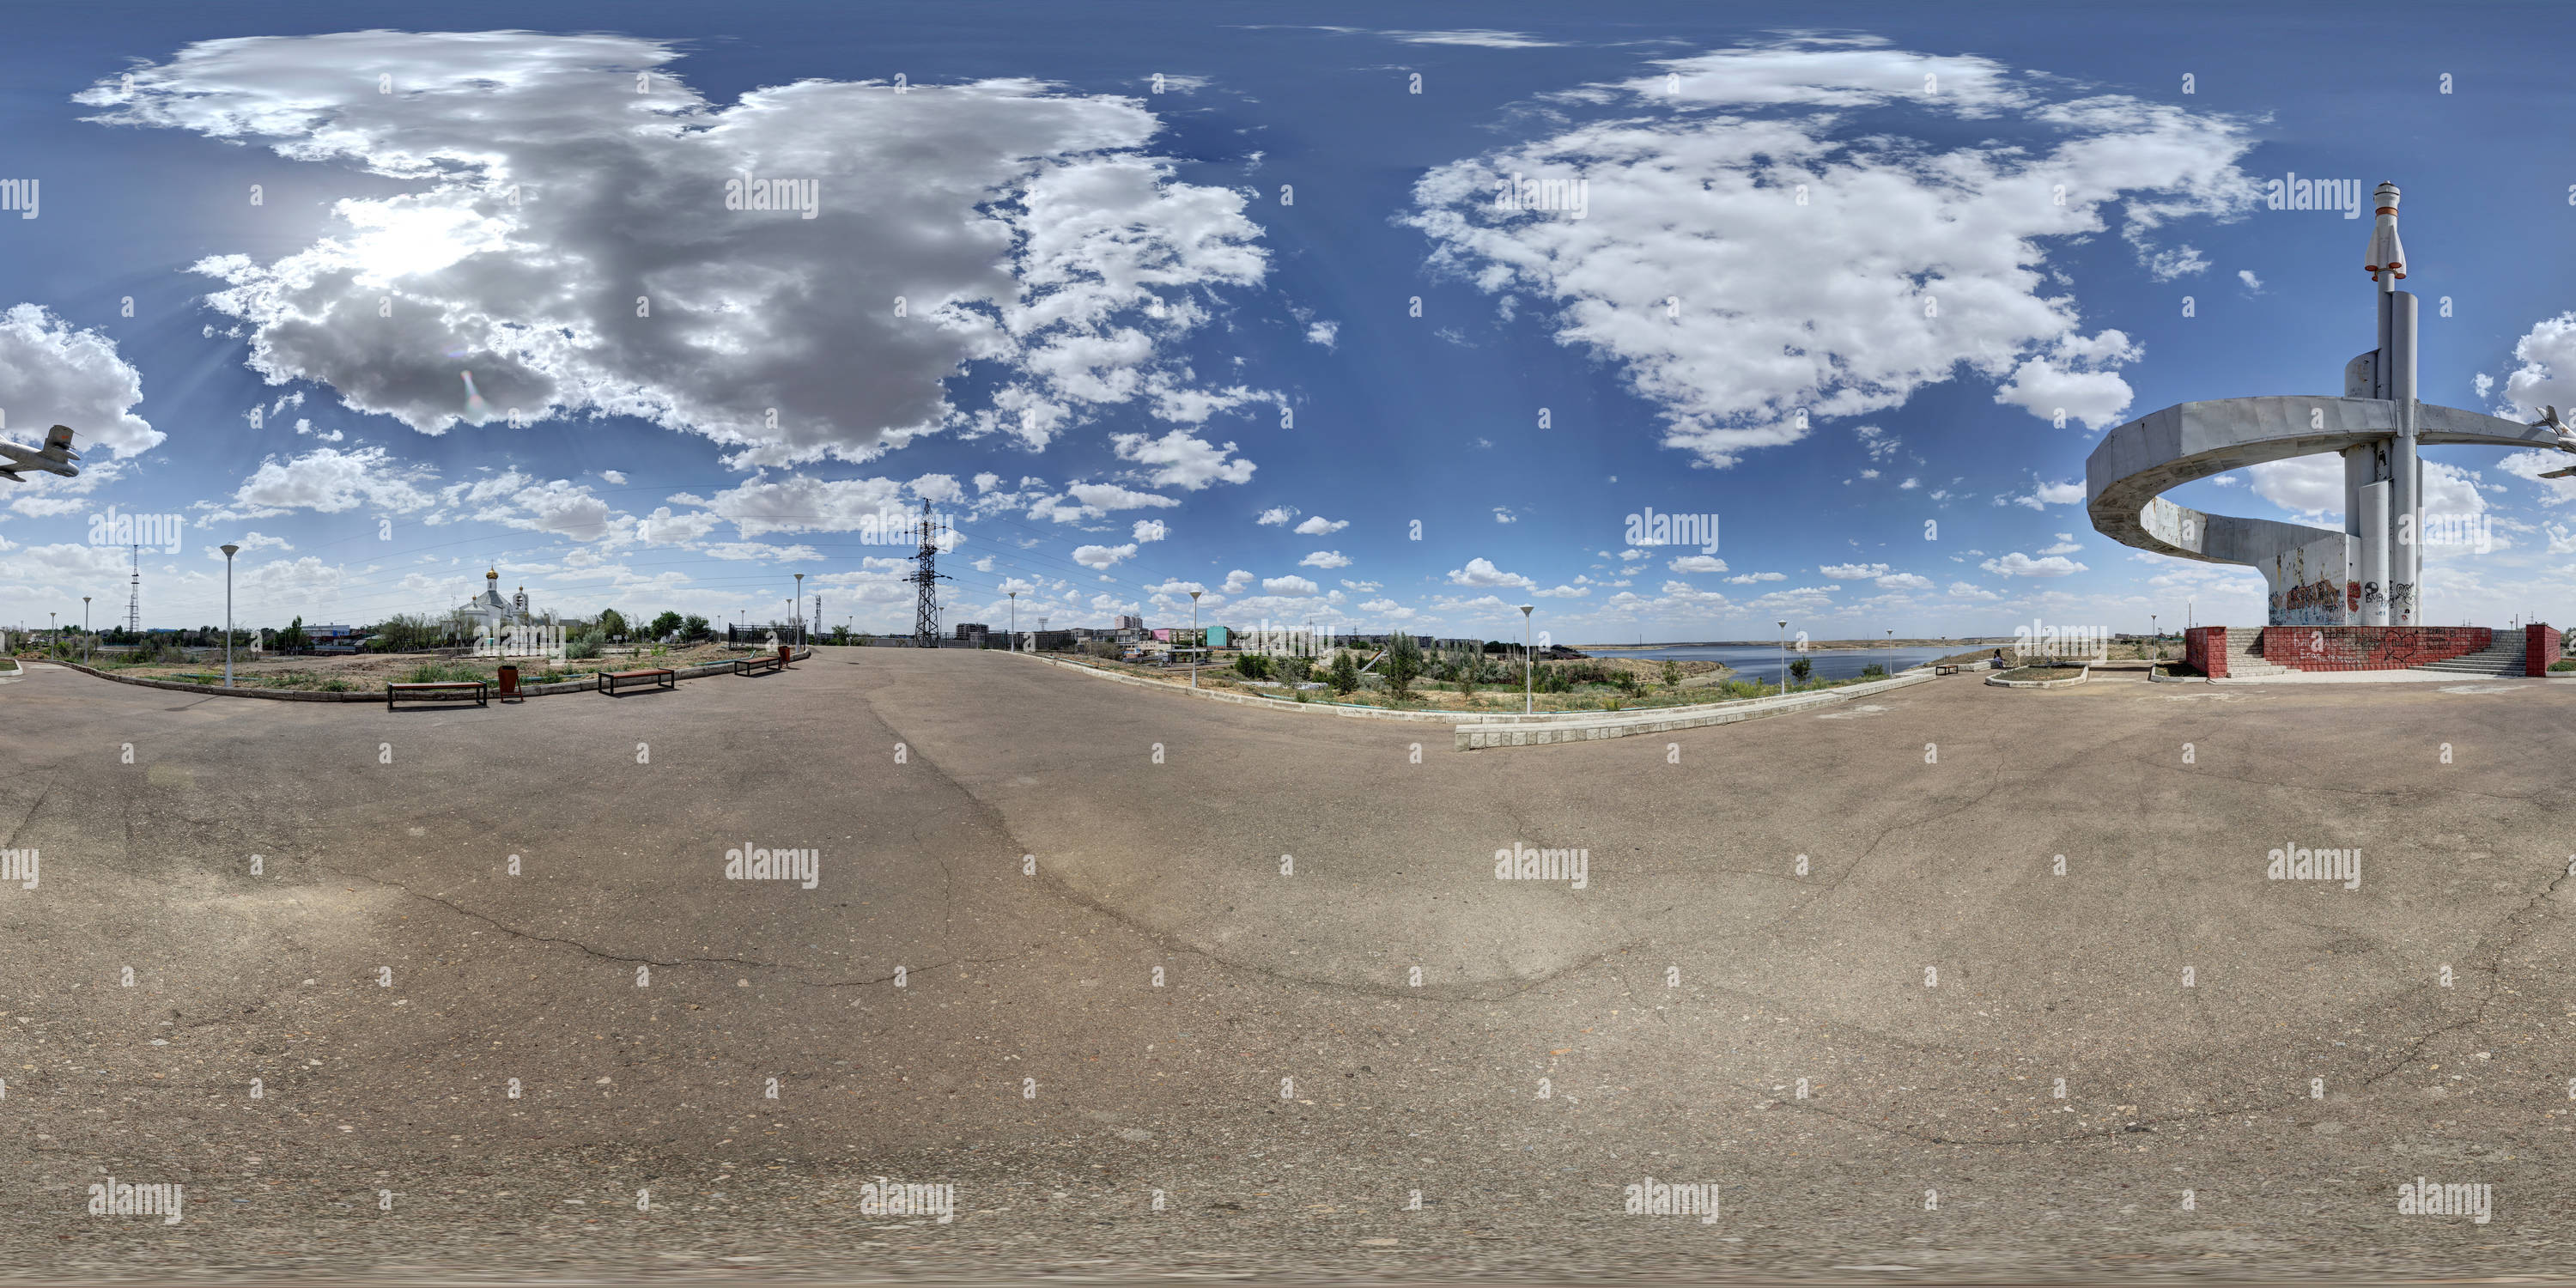 360 degree panoramic view of Monument to Conquerors of Space, Zhezkazgan